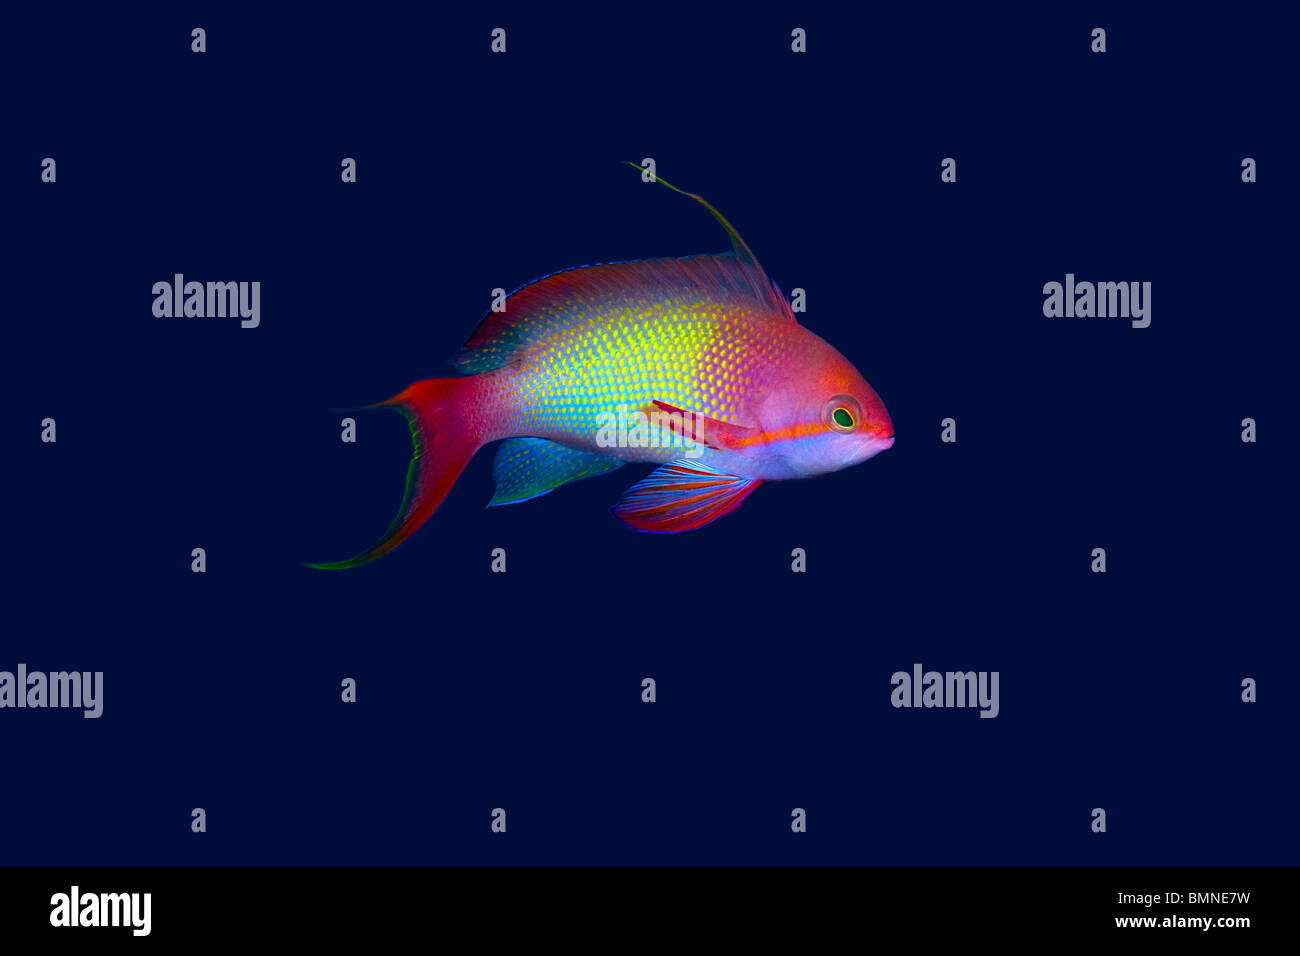 Small colorful tropical fish on blue background Stock Photo